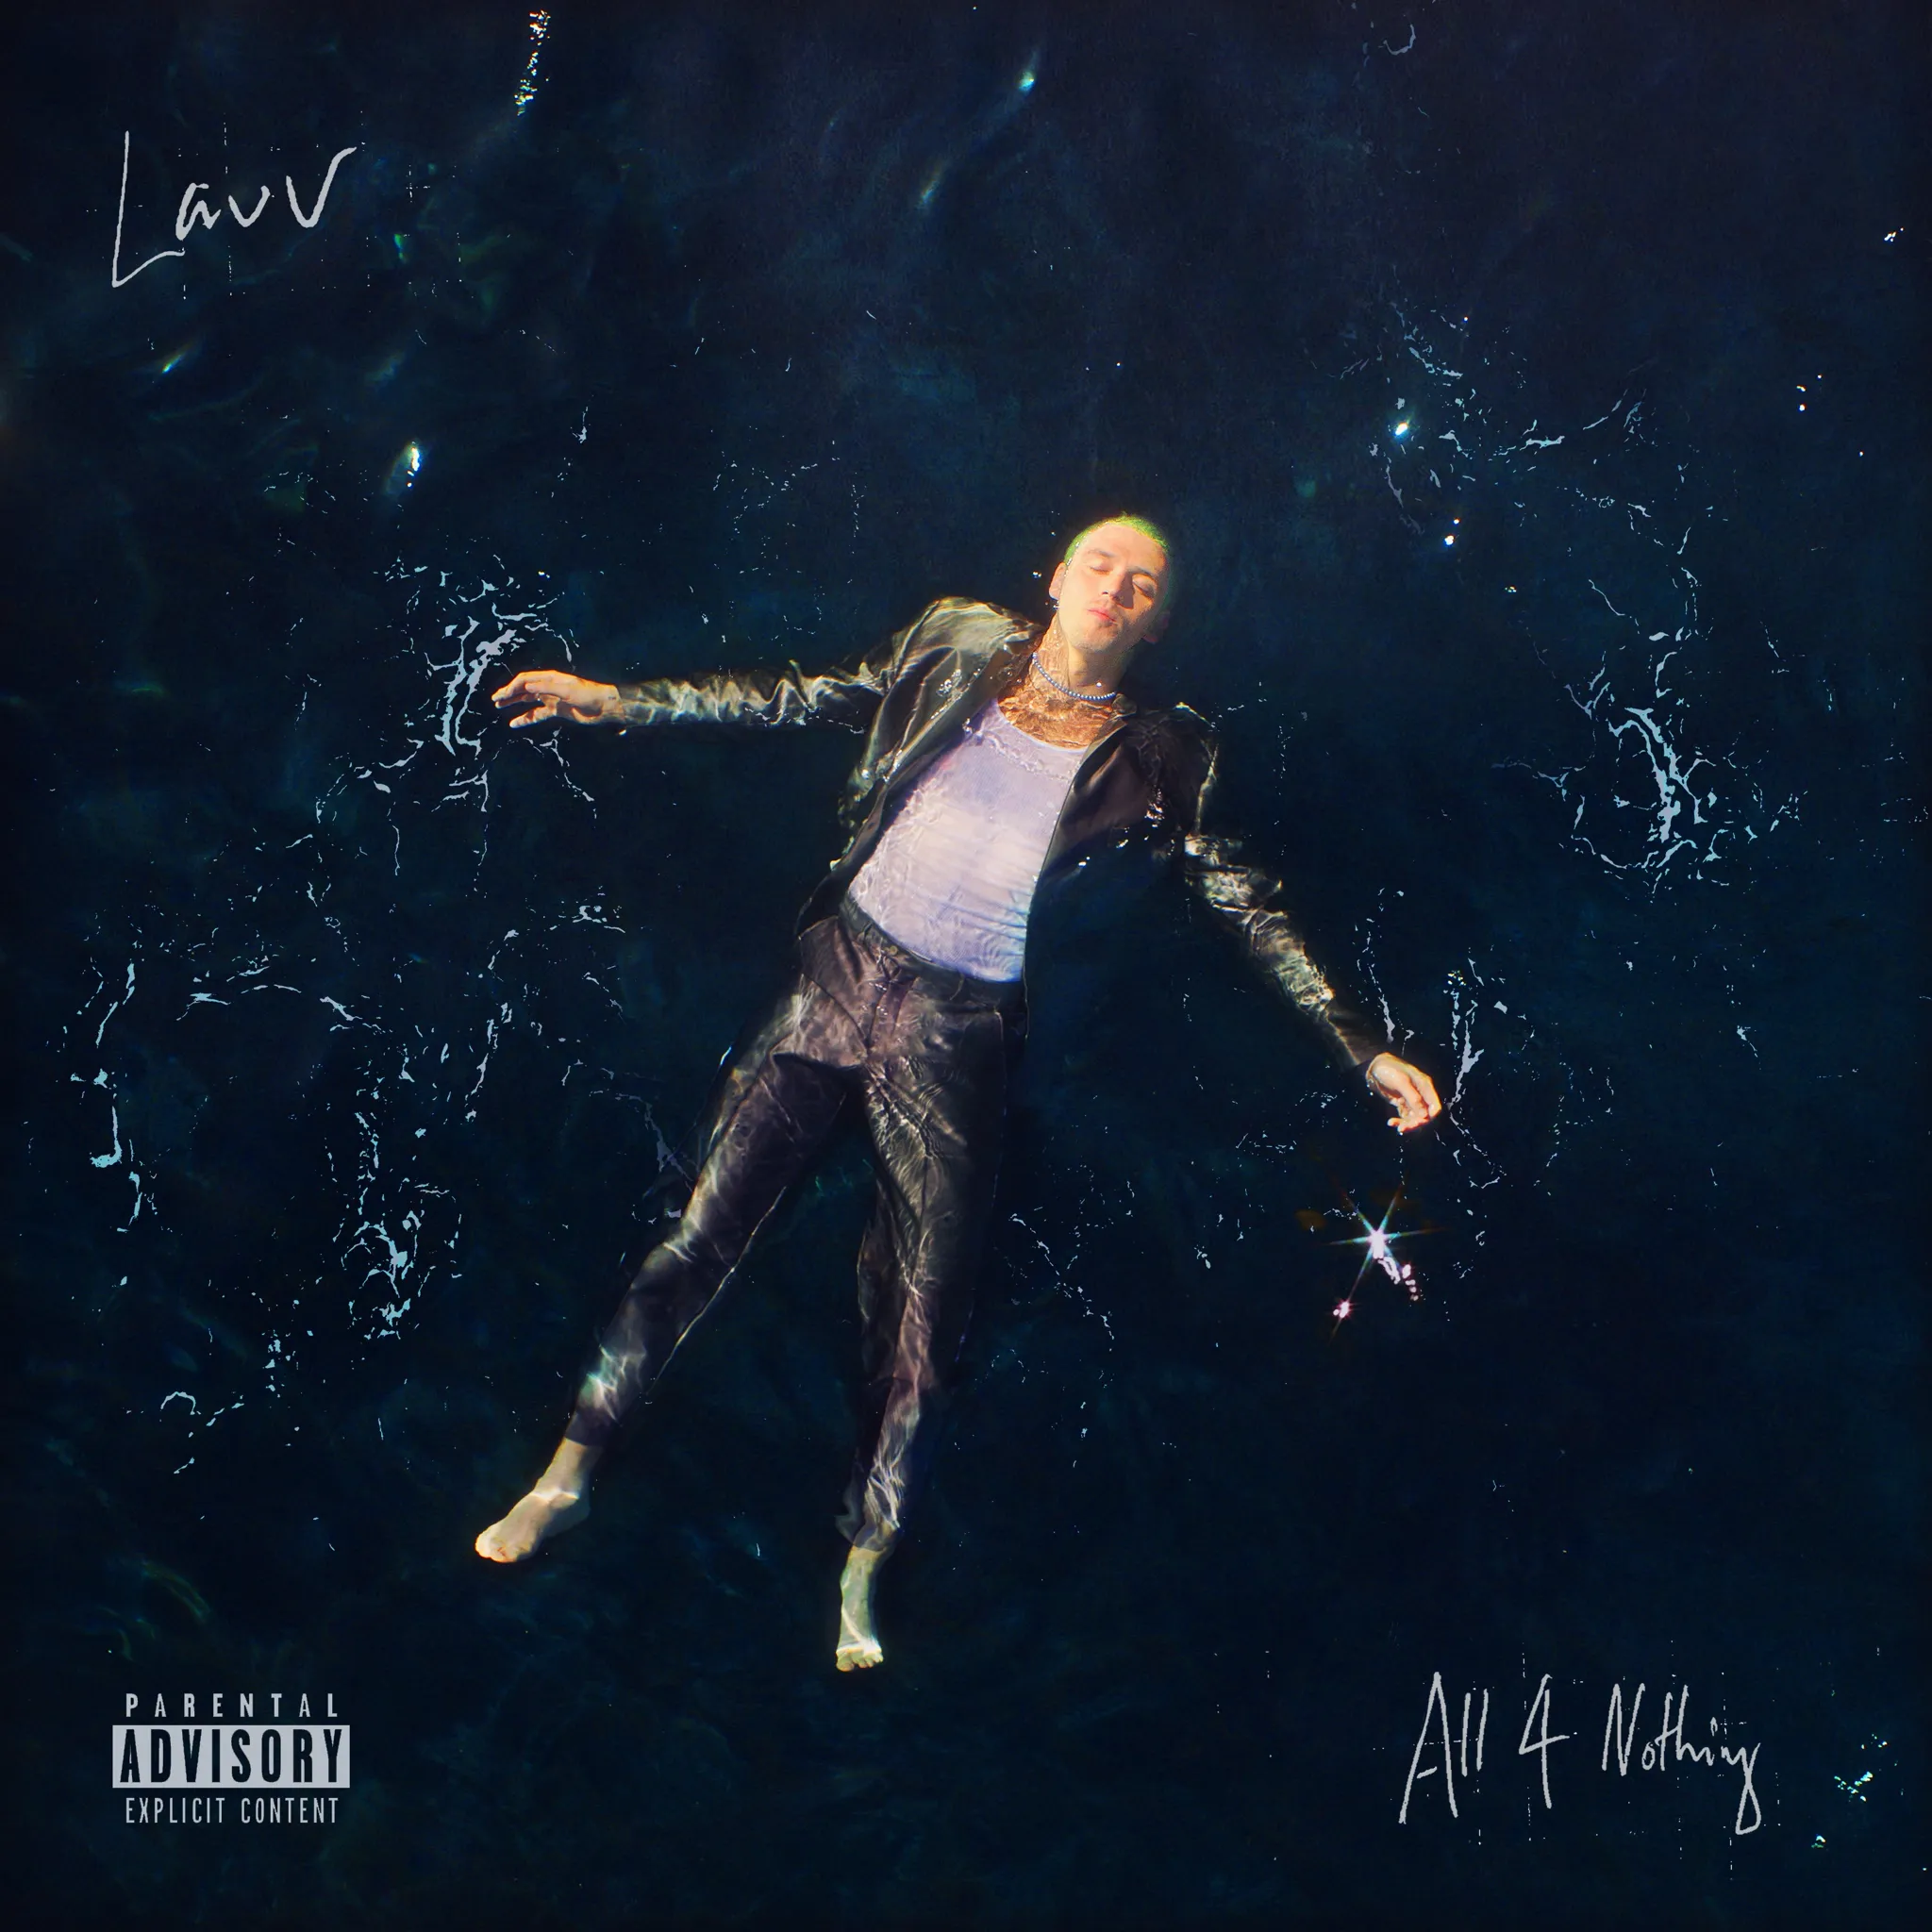 Lauv - All 4 Nothing artwork